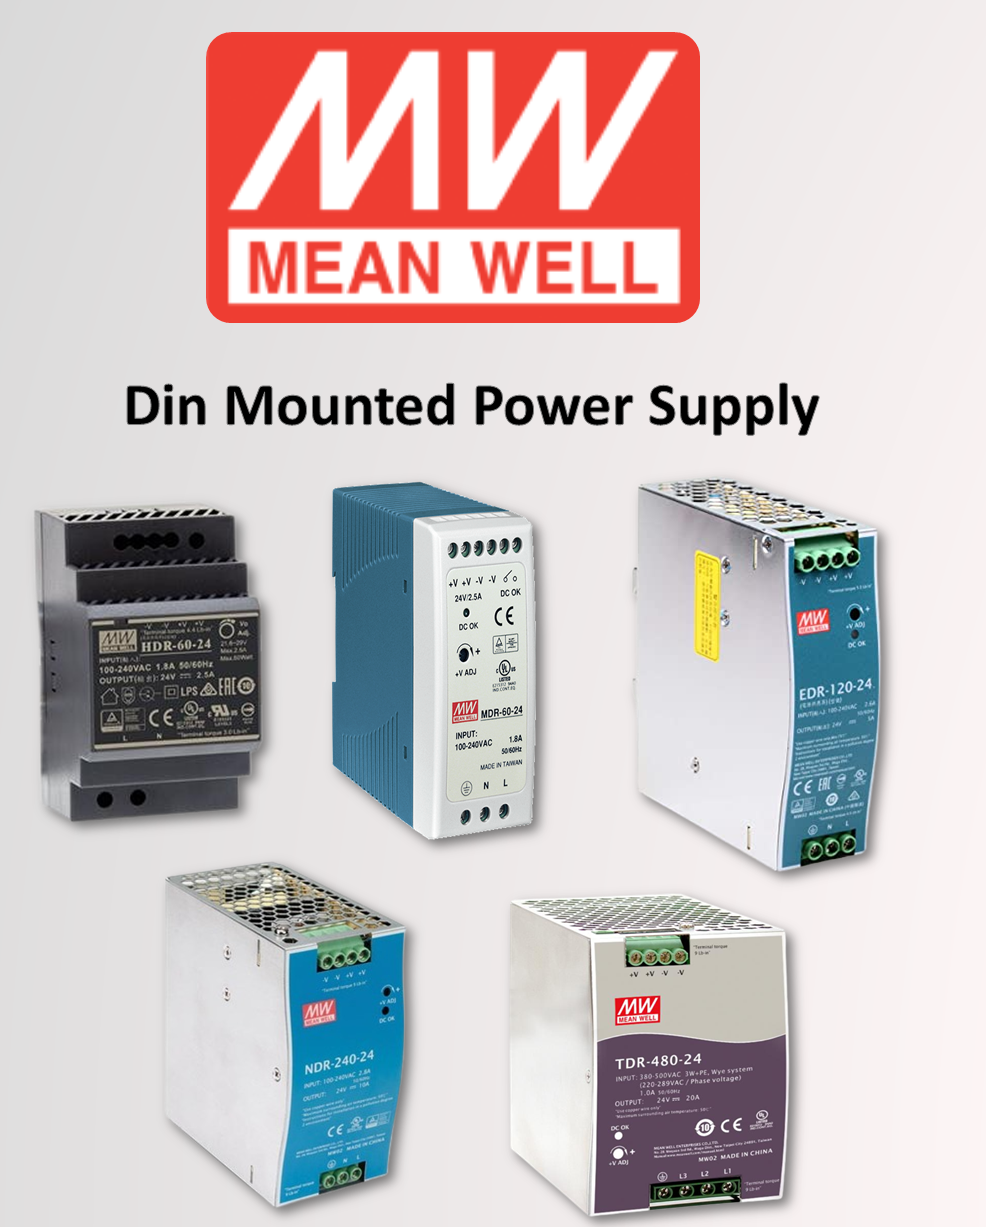 Industrial Electrical Goods - Mean Well